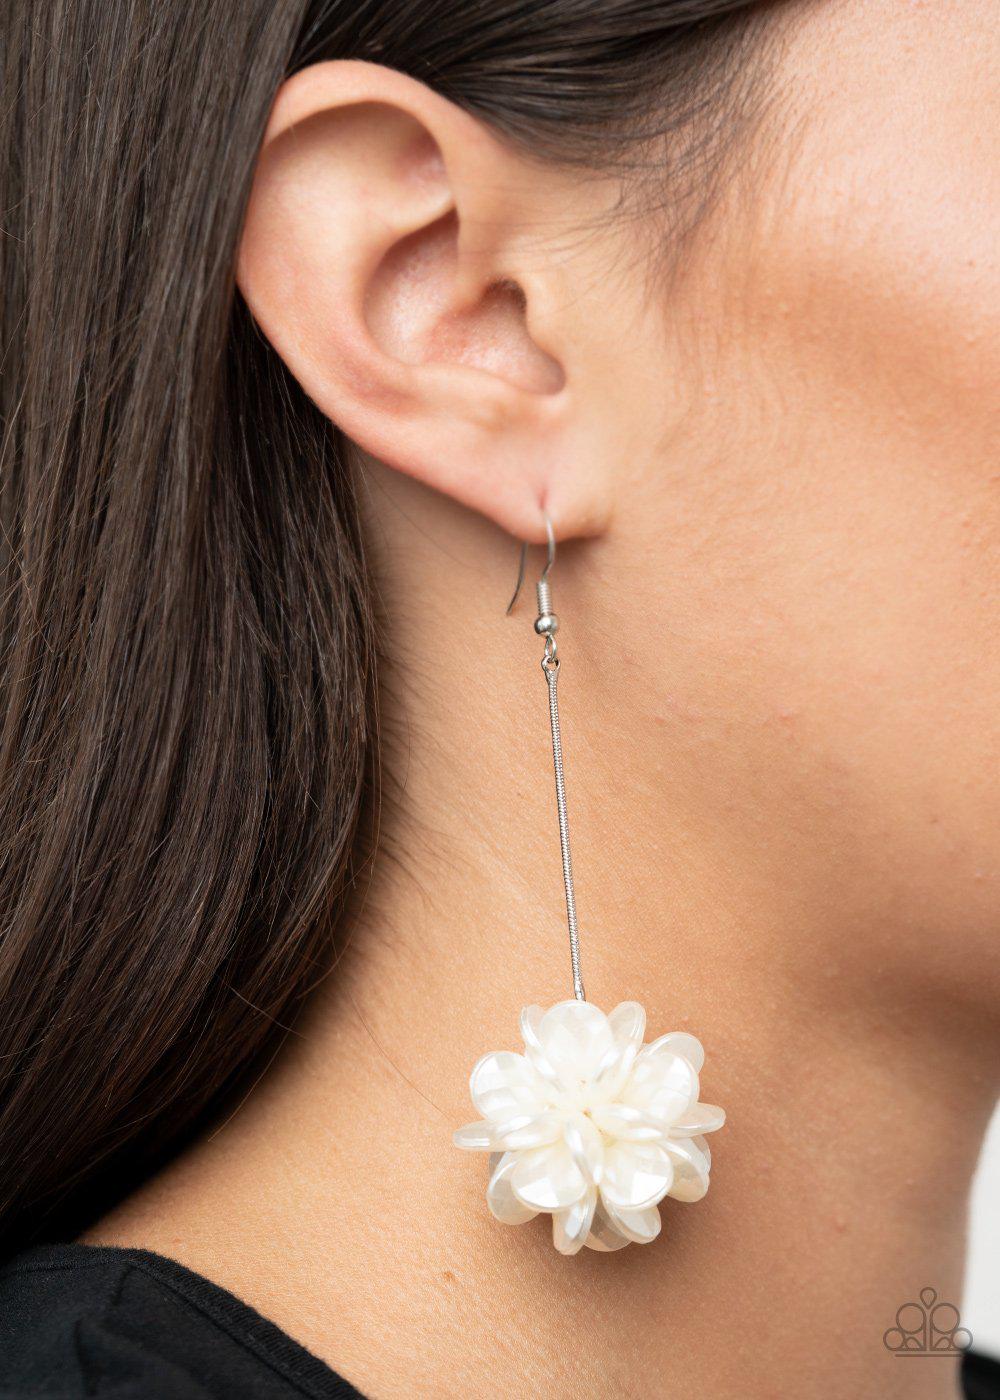 Swing Big White Pearlized Flower Petal Earrings - Paparazzi Accessories LOTP Exclusive January 2021 - model -CarasShop.com - $5 Jewelry by Cara Jewels